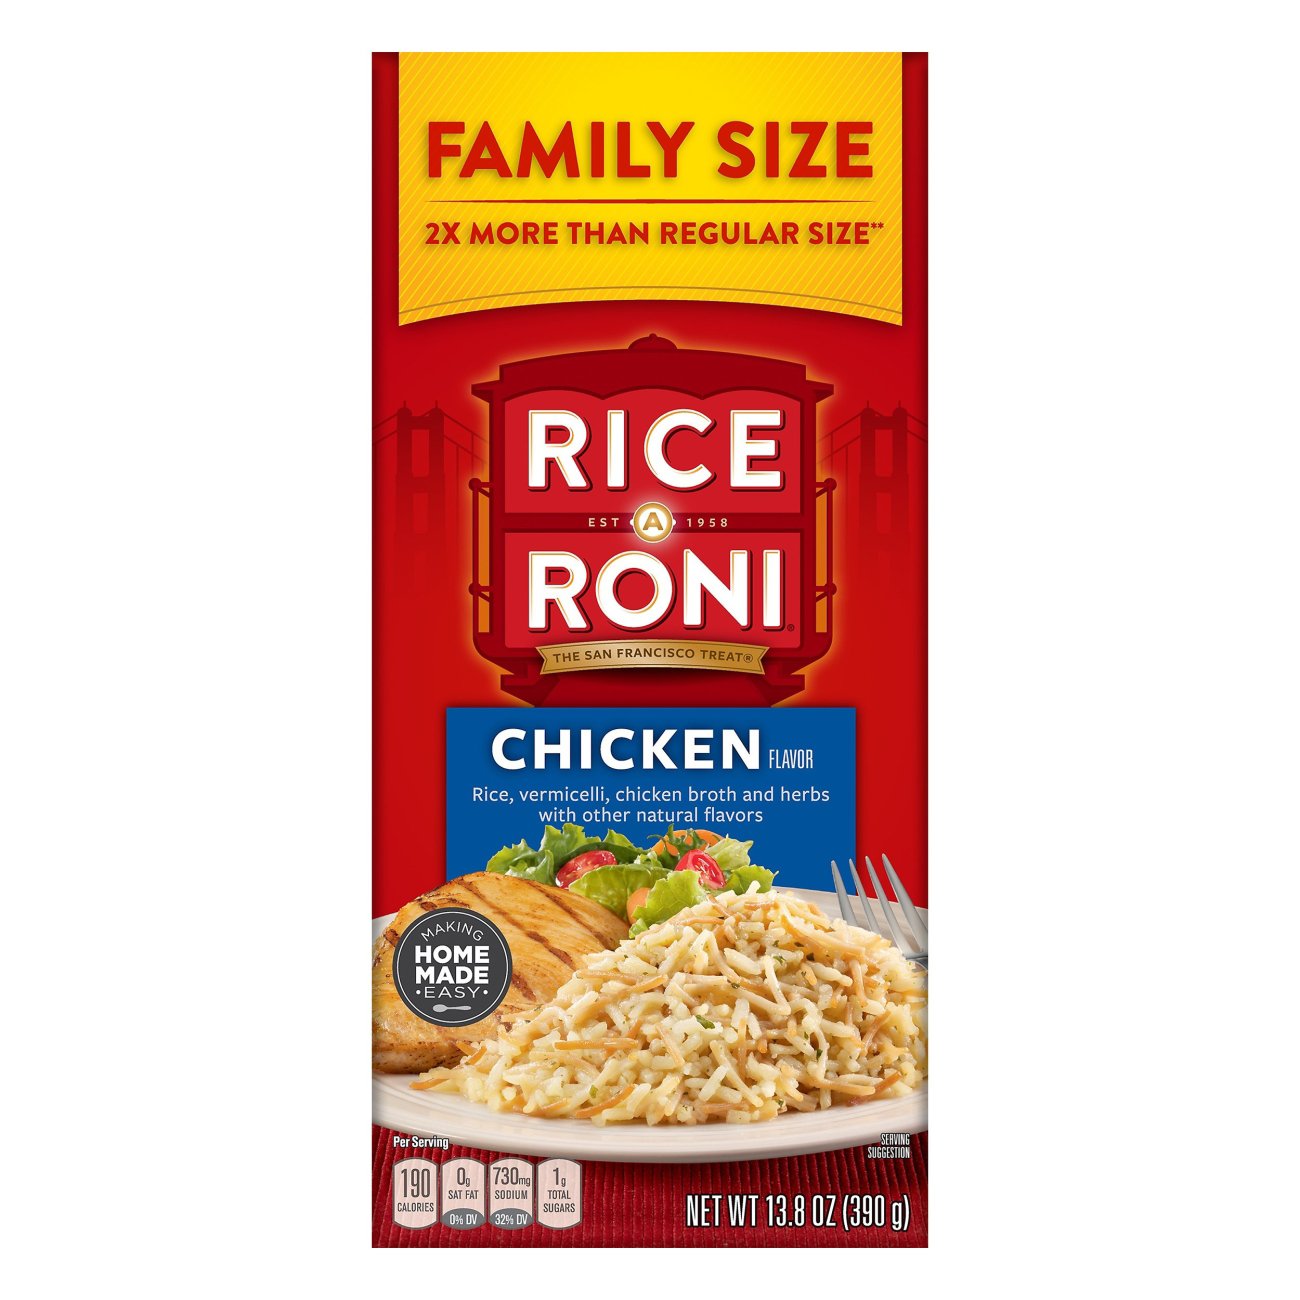 Ben's Original Ready Rice Roasted Chicken Flavored Rice - Shop Rice &  Grains at H-E-B